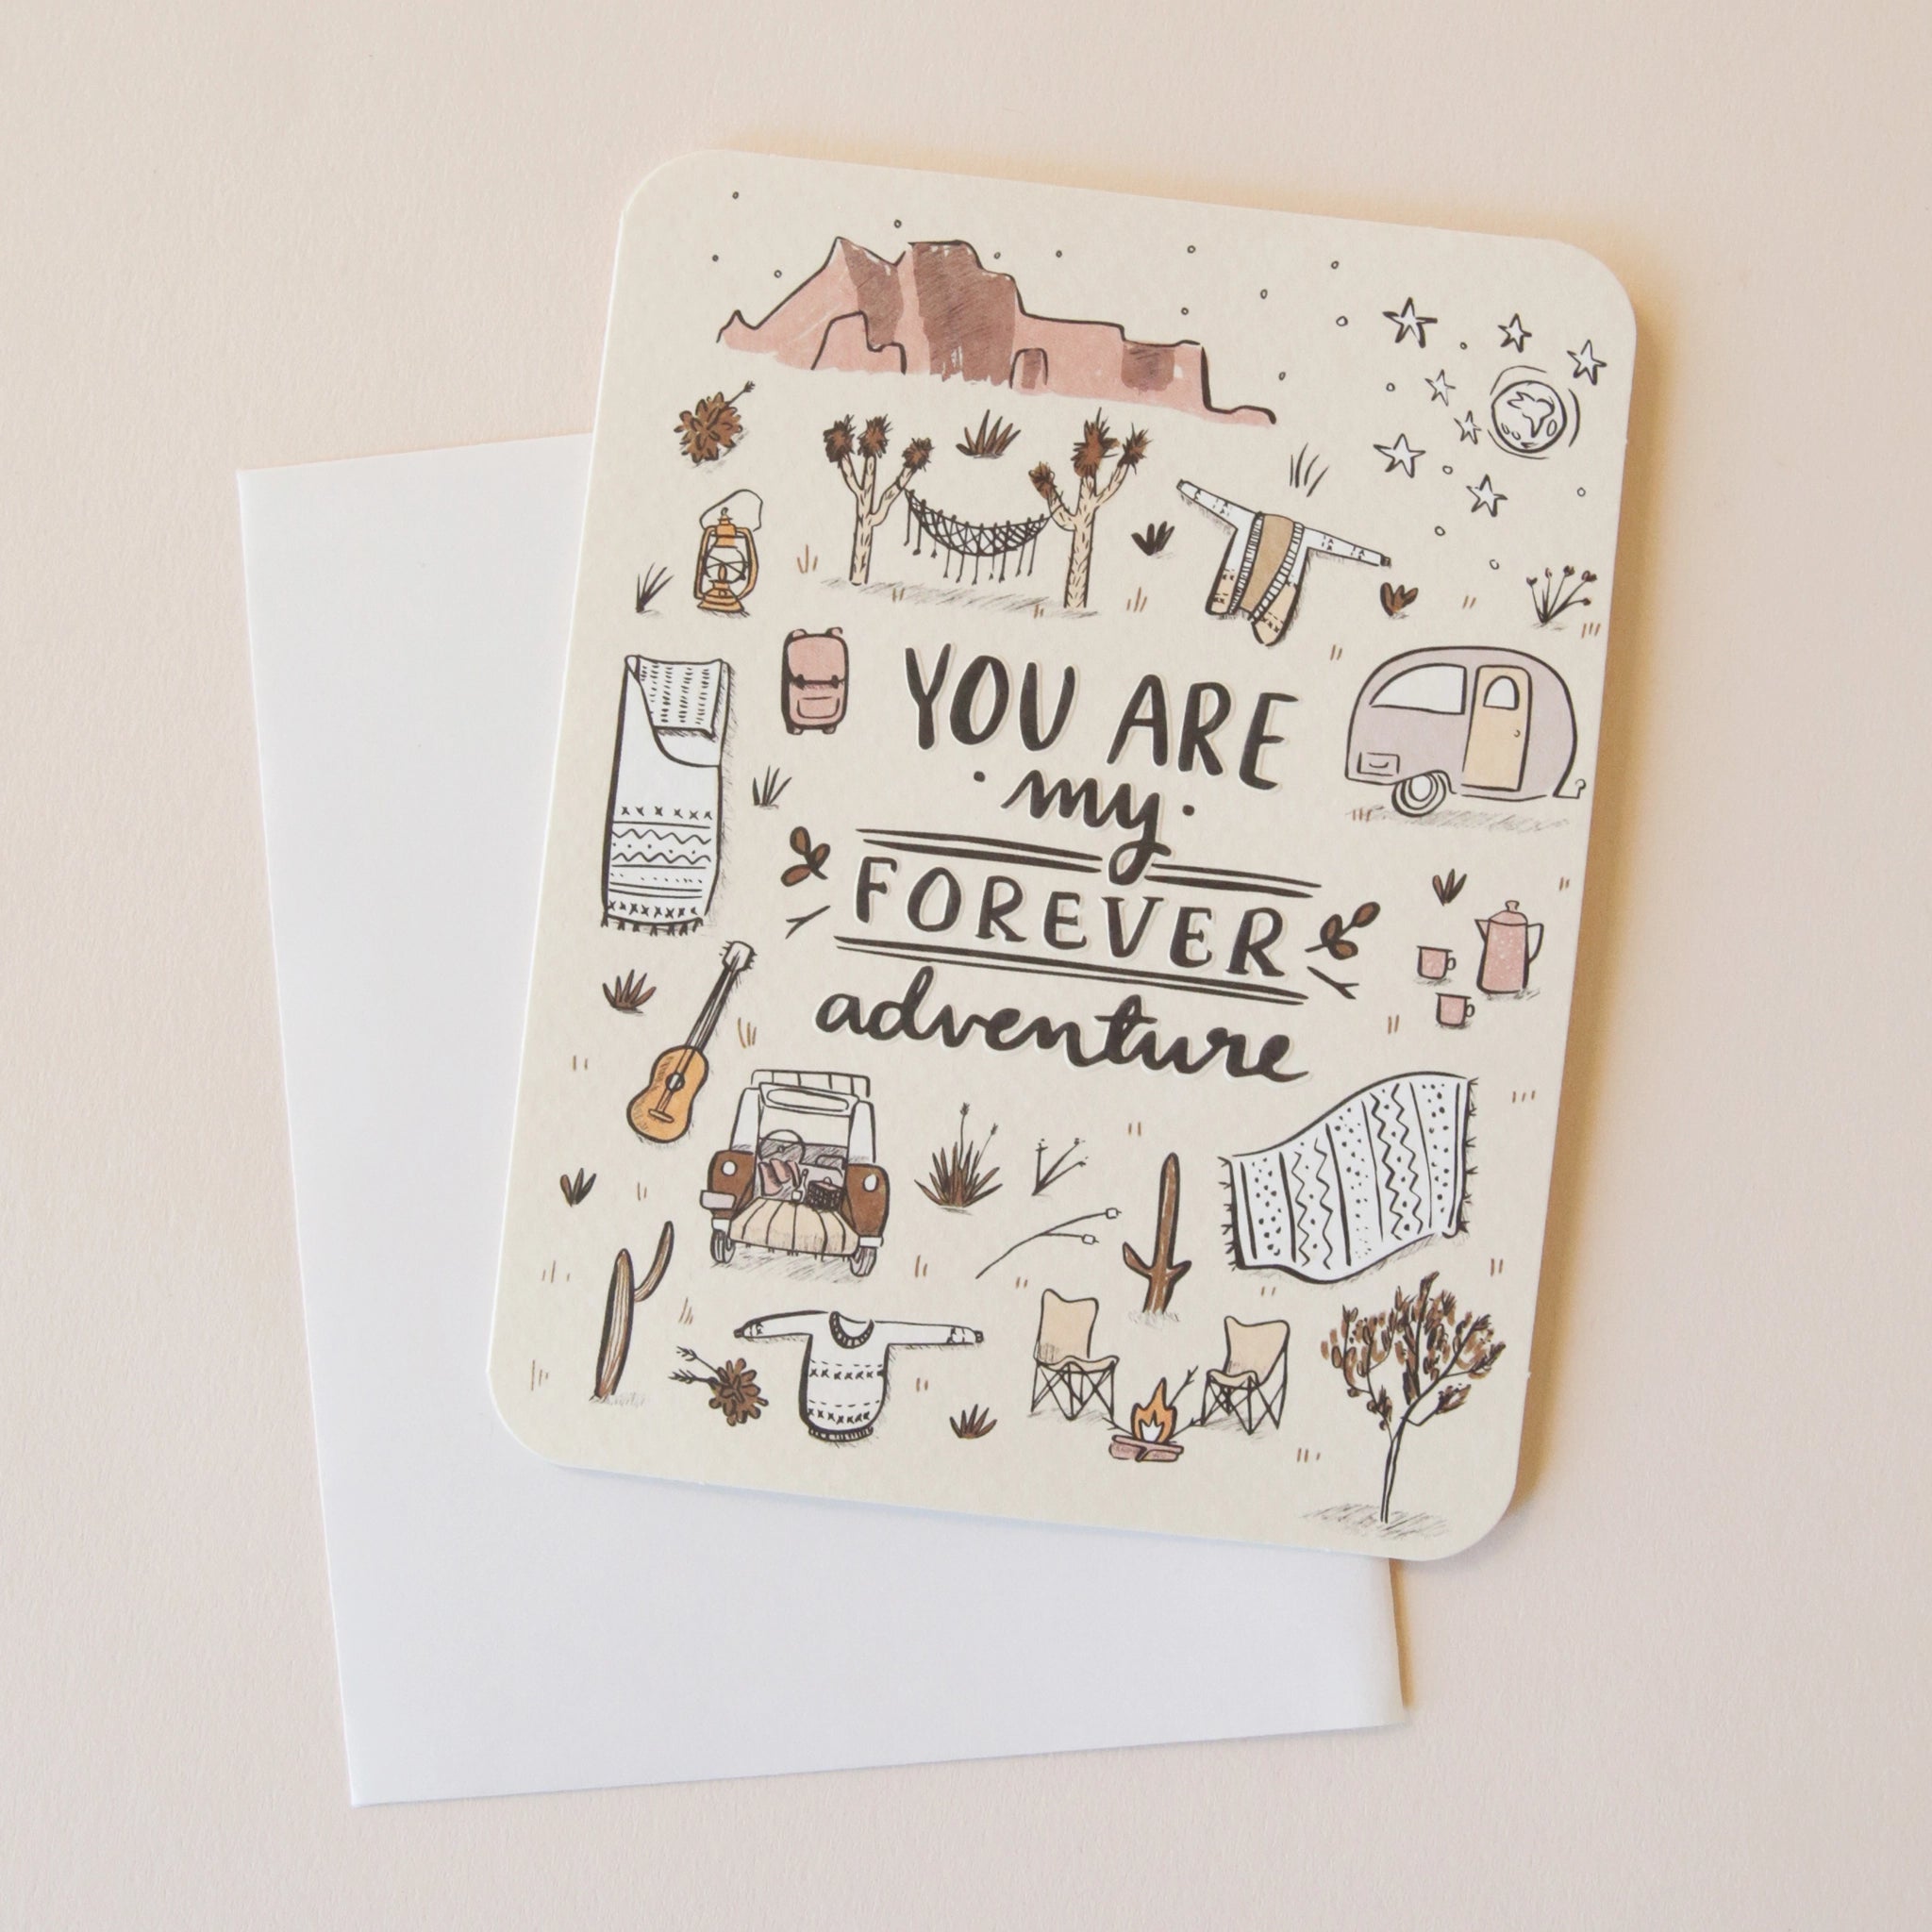 On a neutral background is an ivory card with text in the center that reads, "You Are My Forever Adventure" along with illustrations of various desert camping and road-tripping items, like a camper, a hammock, stars, a campfire and chairs etc as well as a sticker that is included with purchase.